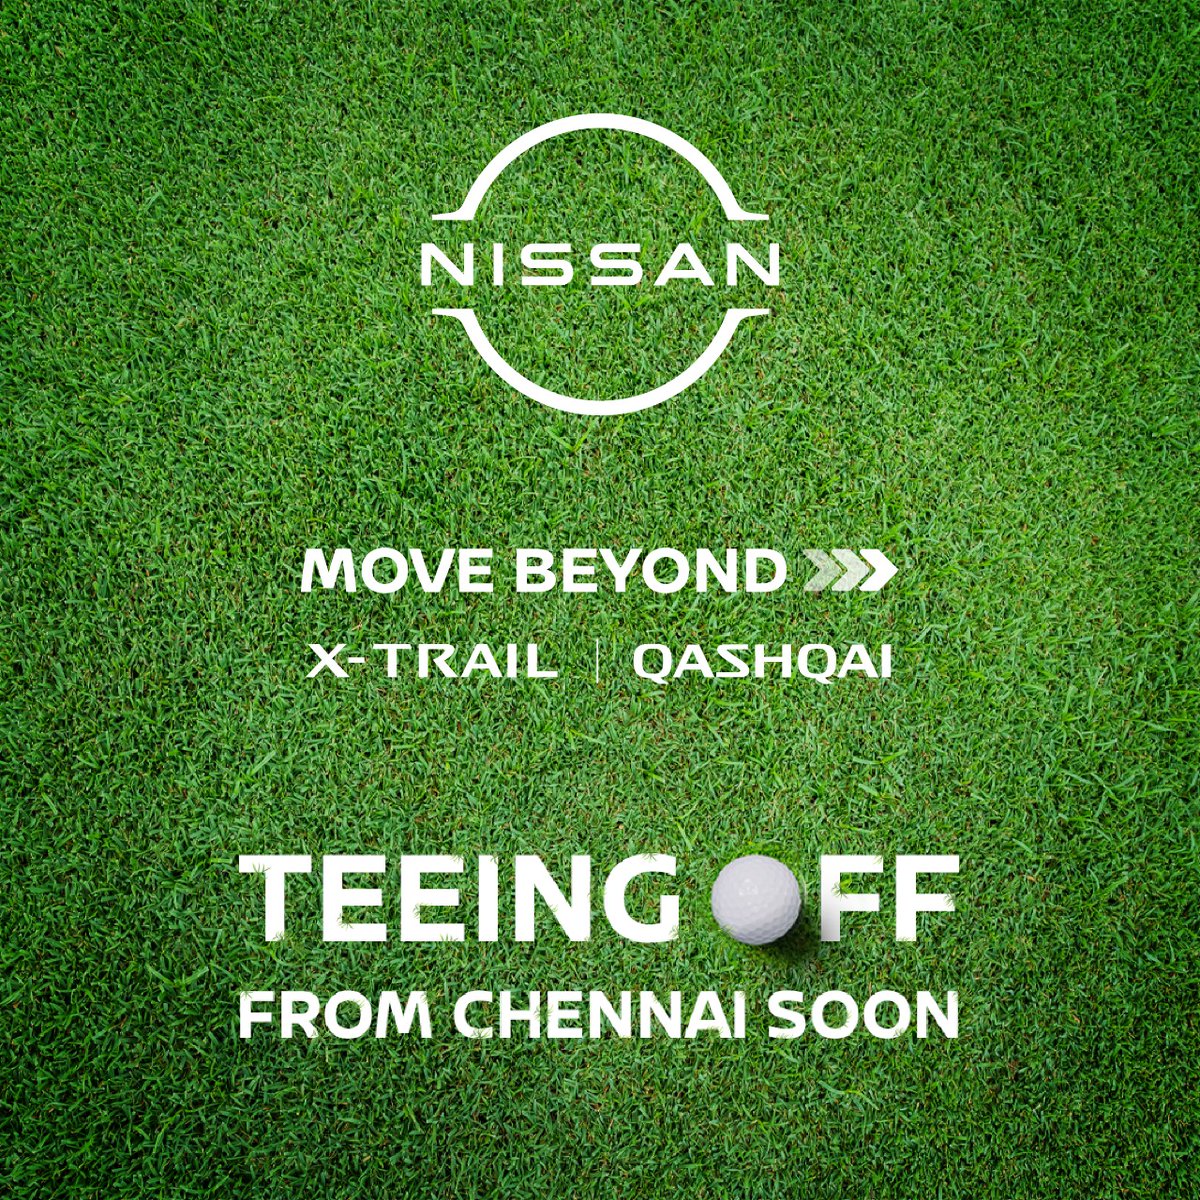 Chennai, it's time to move beyond with the exciting new global SUVs from Nissan. Gear up to witness the future of mobility coming soon to your city.
#NissanIndia #MoveBeyond